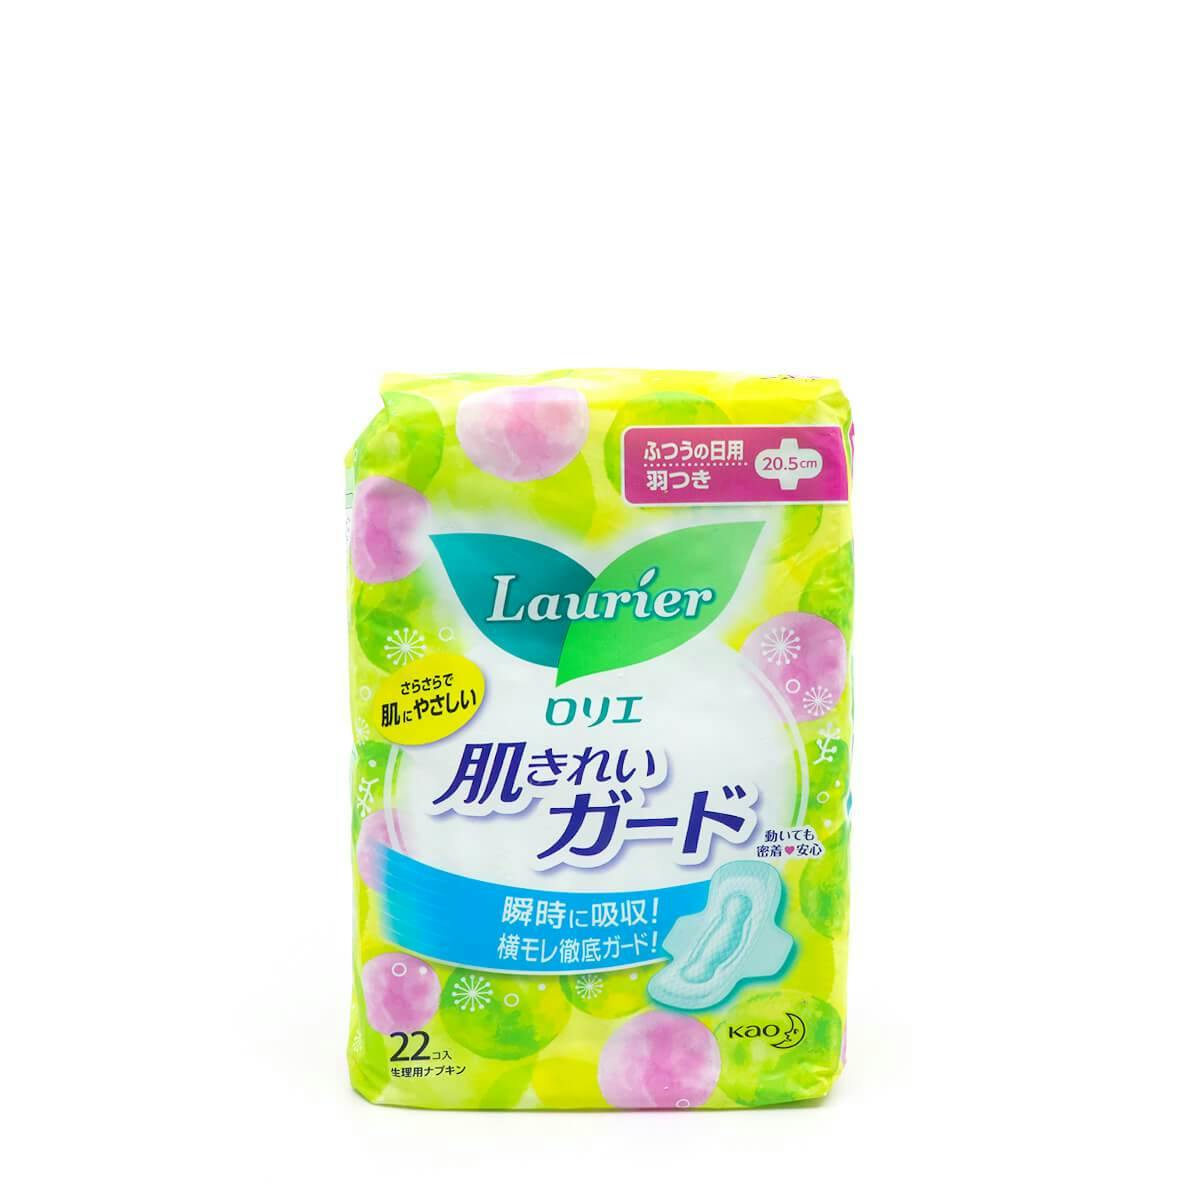 KAO Laurier Sanitary Pads Speed+ Soft Mesh With Wing (22pcs)【日本进口】